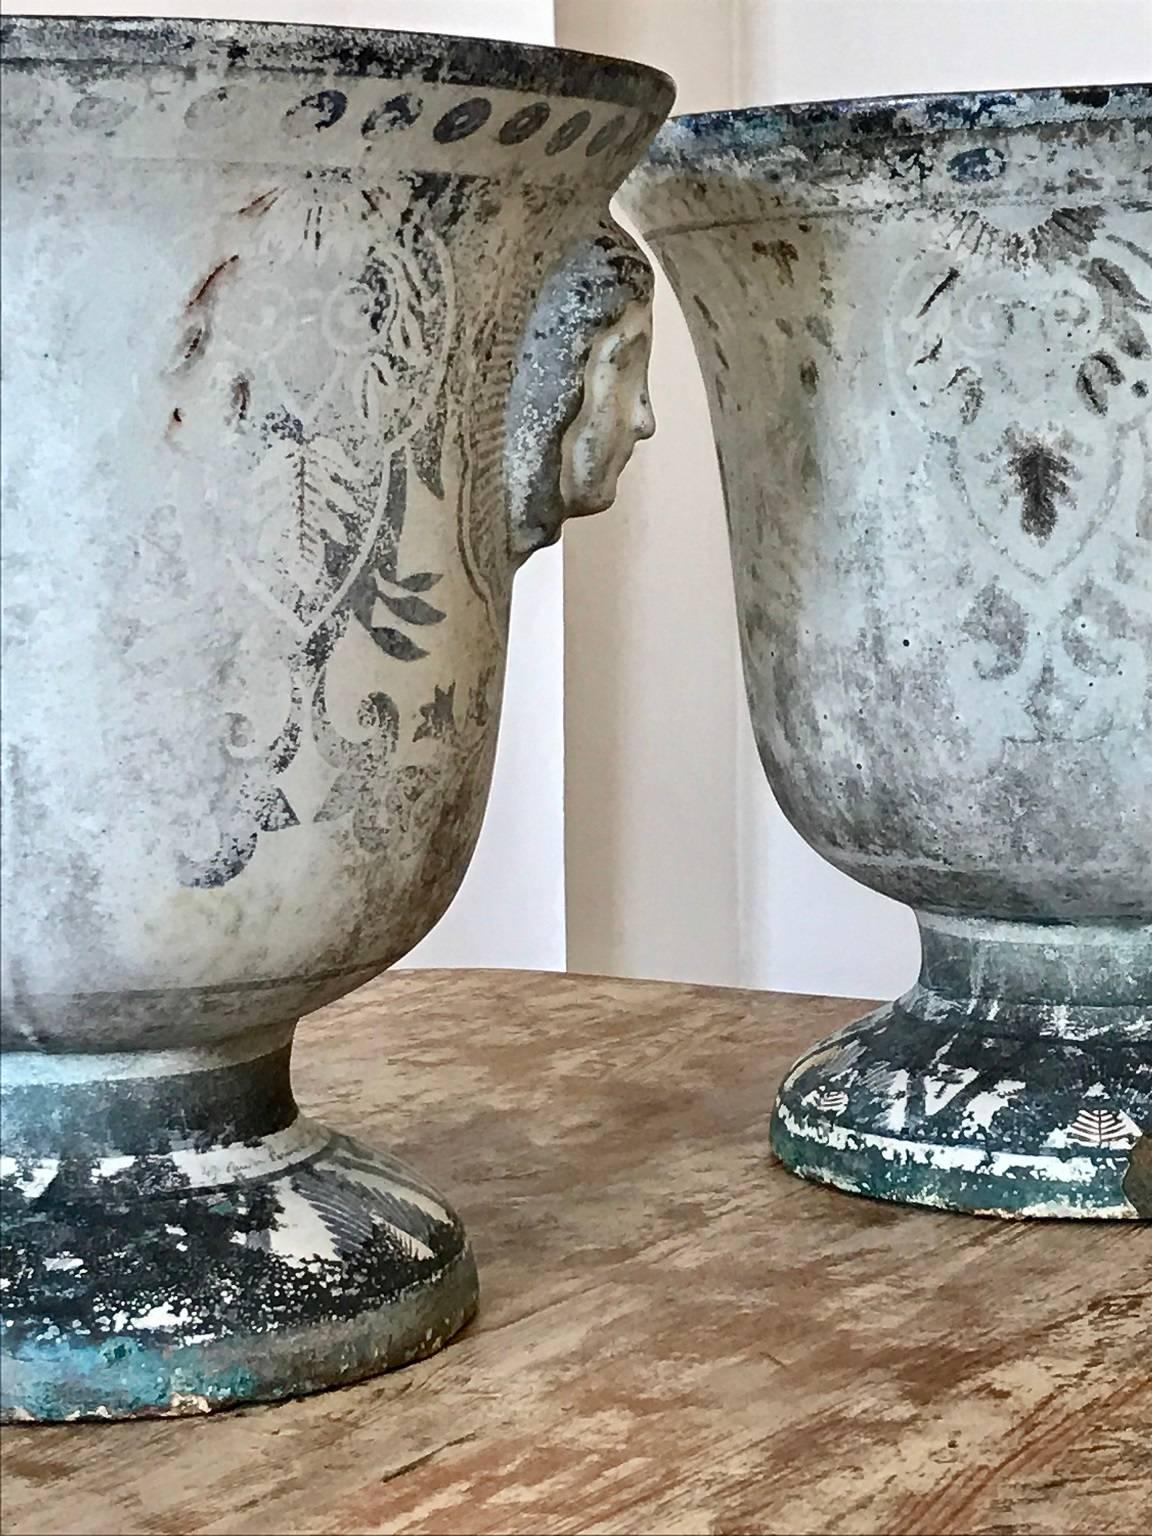 Two mid-19th century enameled cast iron urns; classical decoration in the enamel; 